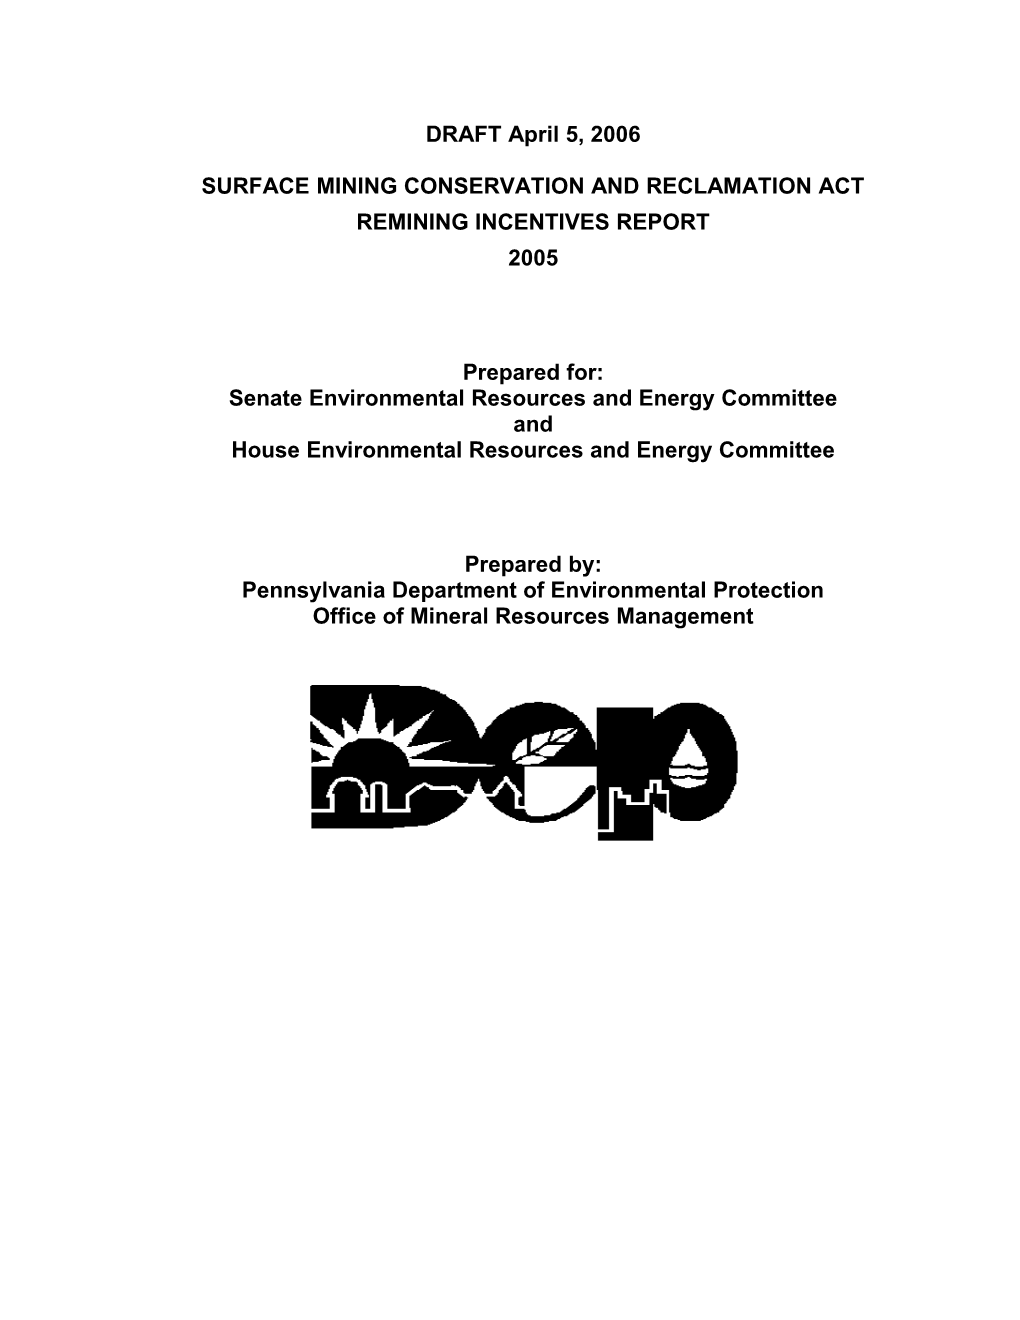 Surface Mining Conservation and Reclamation Act